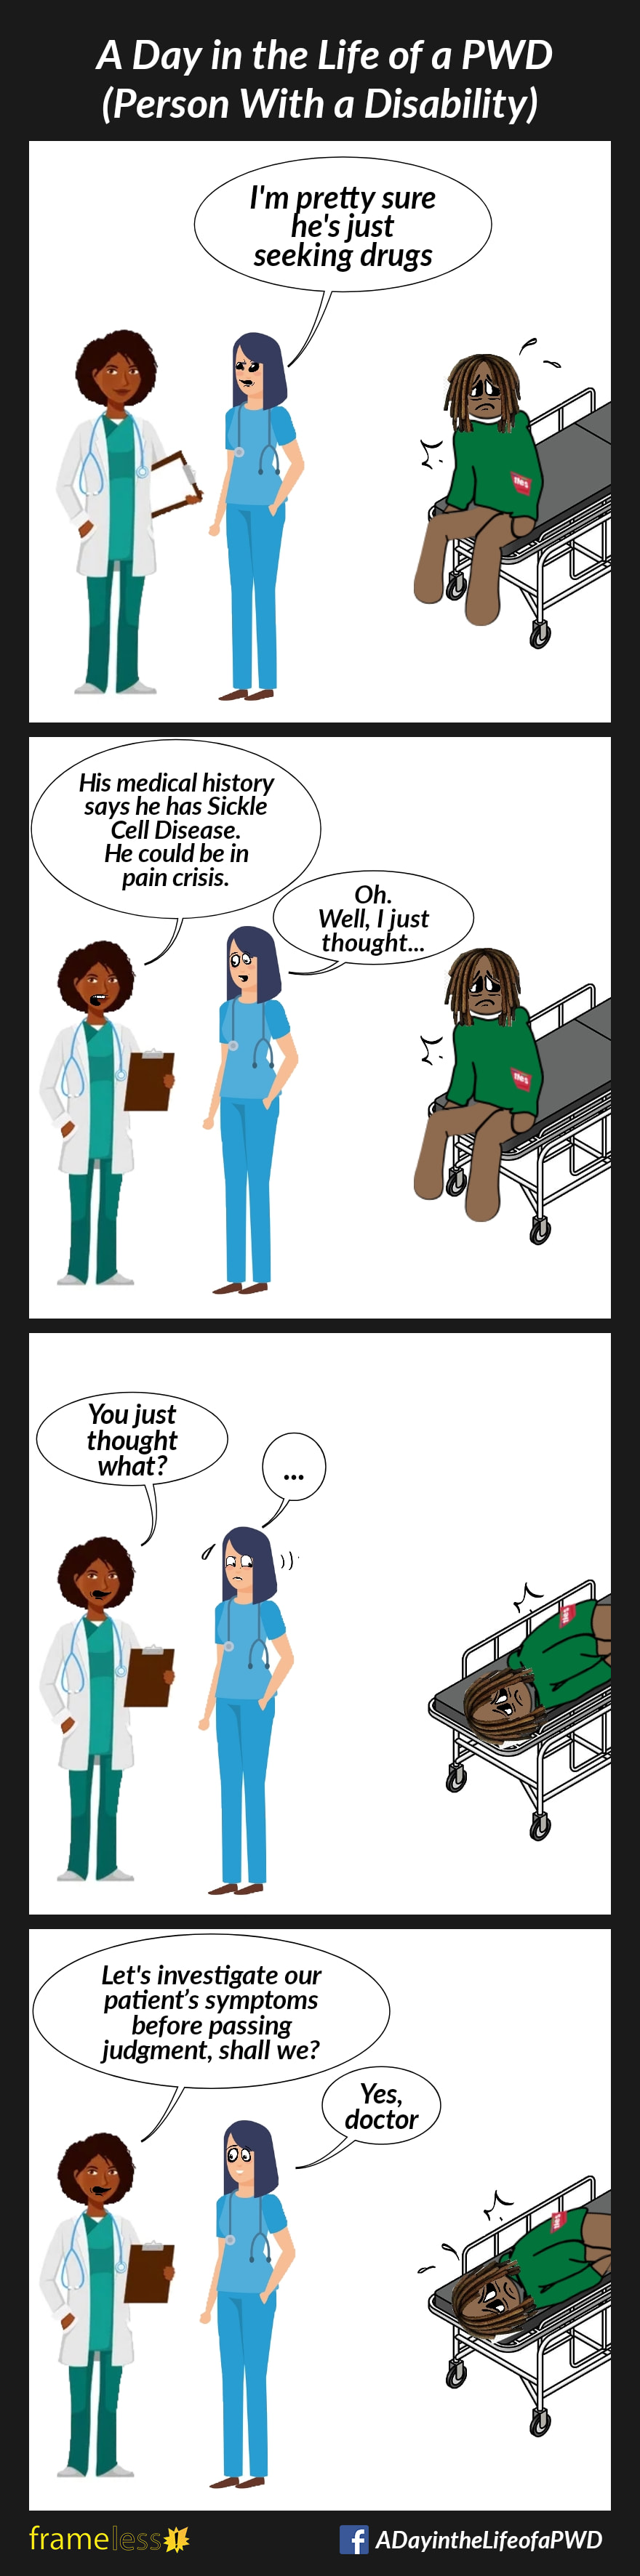 COMIC STRIP 
A Day in the Life of a PWD (Person With a Disability) 

Frame 1:
A Black man with dreadlocks is sitting on a hospital gurney. He is upset and in pain.
Nearby, a White nurse talks to a Black doctor.
NURSE: I'm pretty sure he's just seeking drugs

Frame 2:
DOCTOR (looking at a chart): His medical history says he has Sickle Cell Disease. He could be in pain crisis.
NURSE: Oh. Well, I just thought...

Frame 3:
DOCTOR: You just thought what?
NURSE: ...

Frame 4:
DOCTOR: Let’s investigate our patient’s symptoms before passing judgment, shall we?
NURSE: Yes, doctor